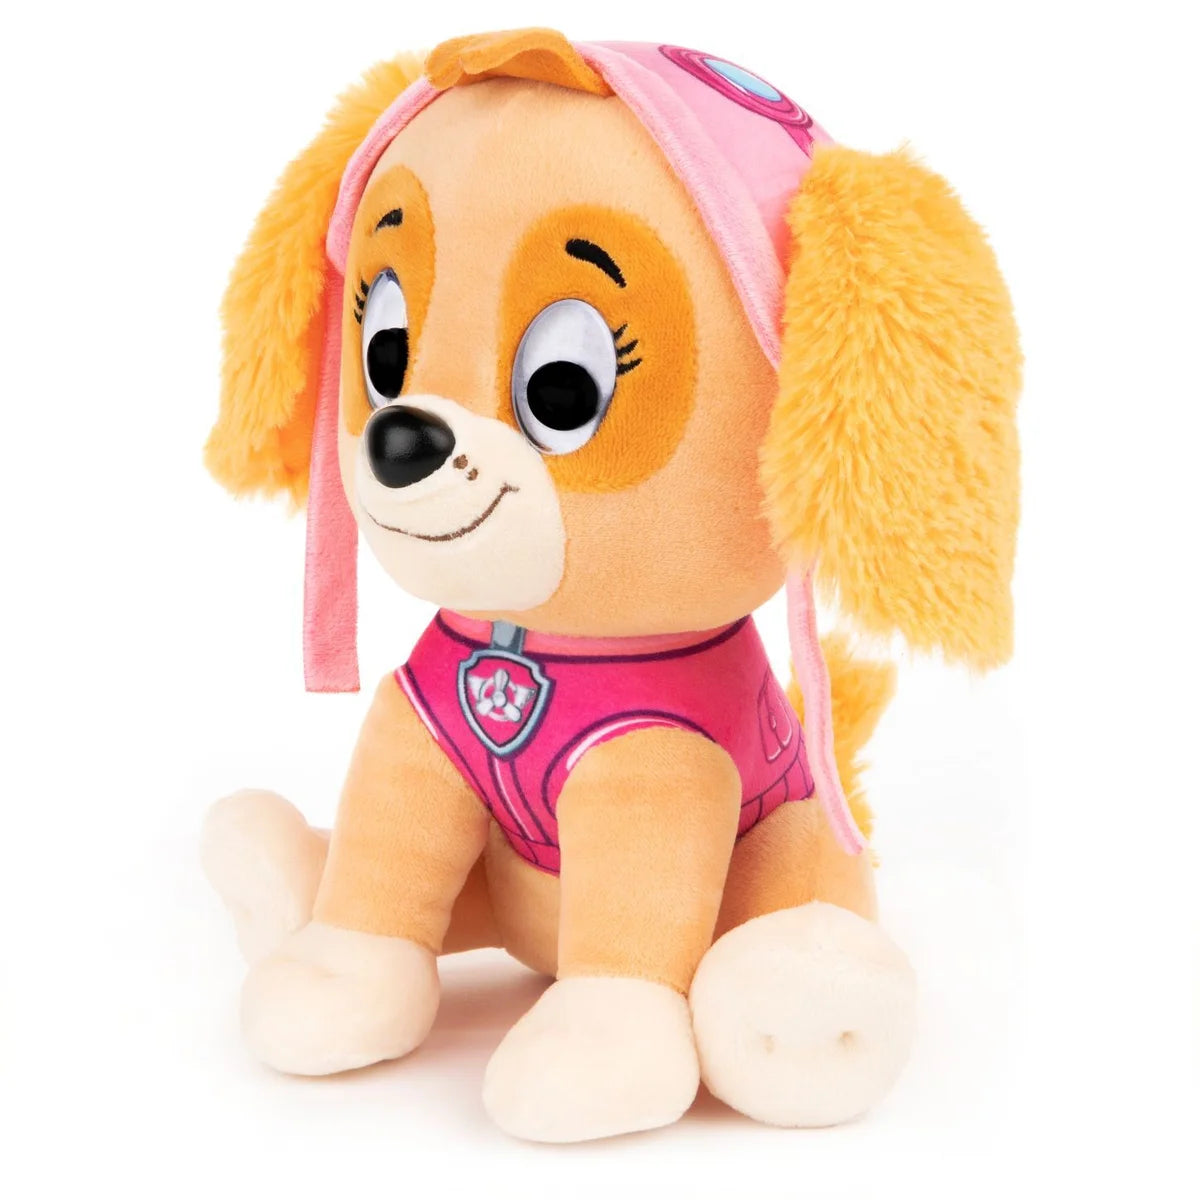 GUND Paw Patrol Skye in Signature Aviator Pilot Uniform for Ages 1 and Up, 9" - Plush Toys Heretoserveyou